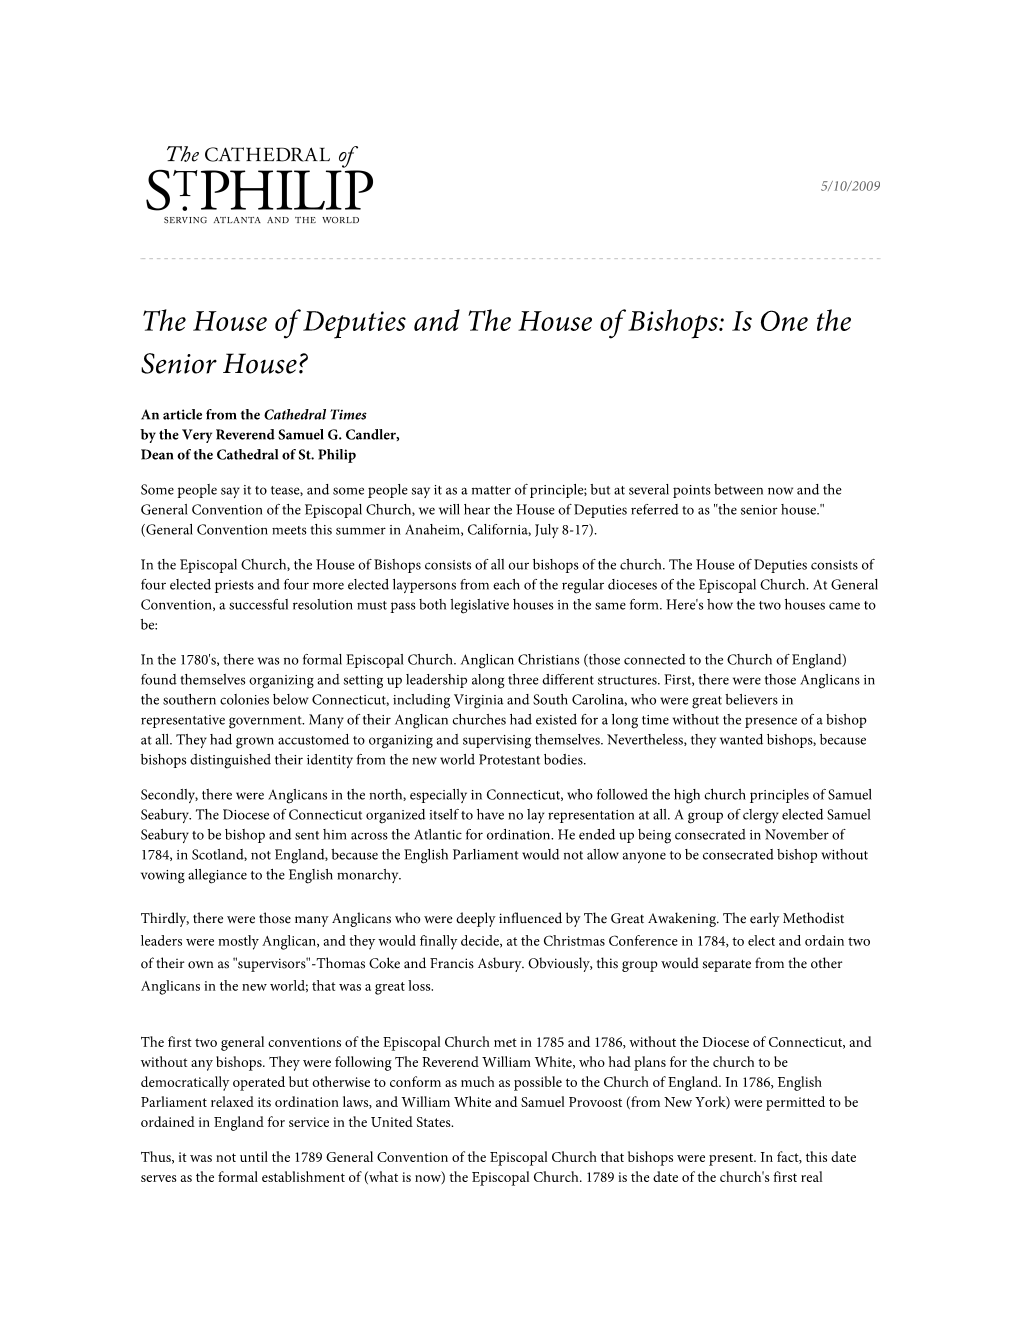 The House of Deputies and the House of Bishops: Is One the Senior House?